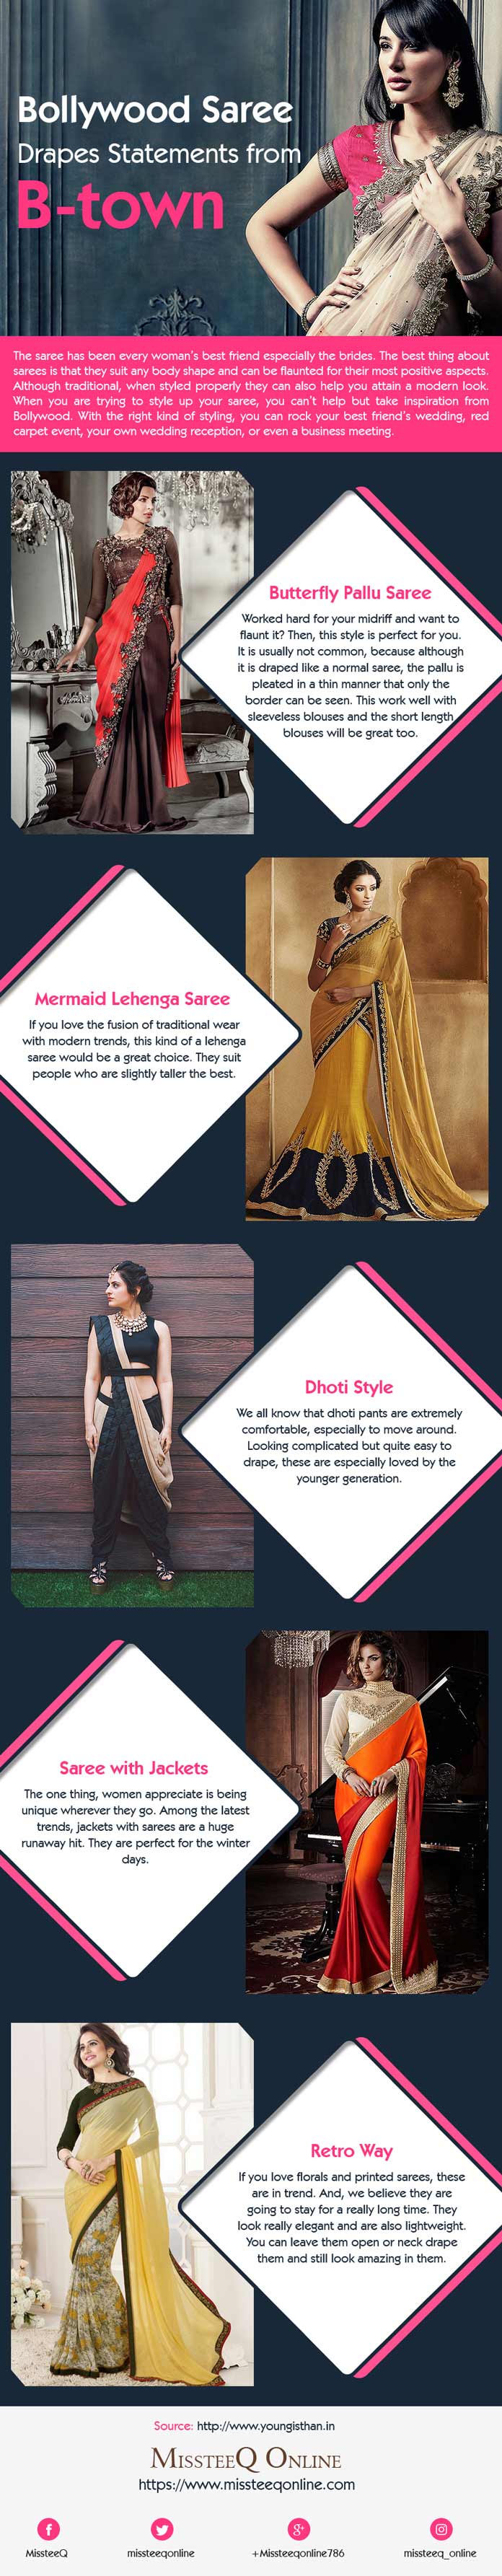 Bollywood Saree Drapes Statements from B-town [Infographic]